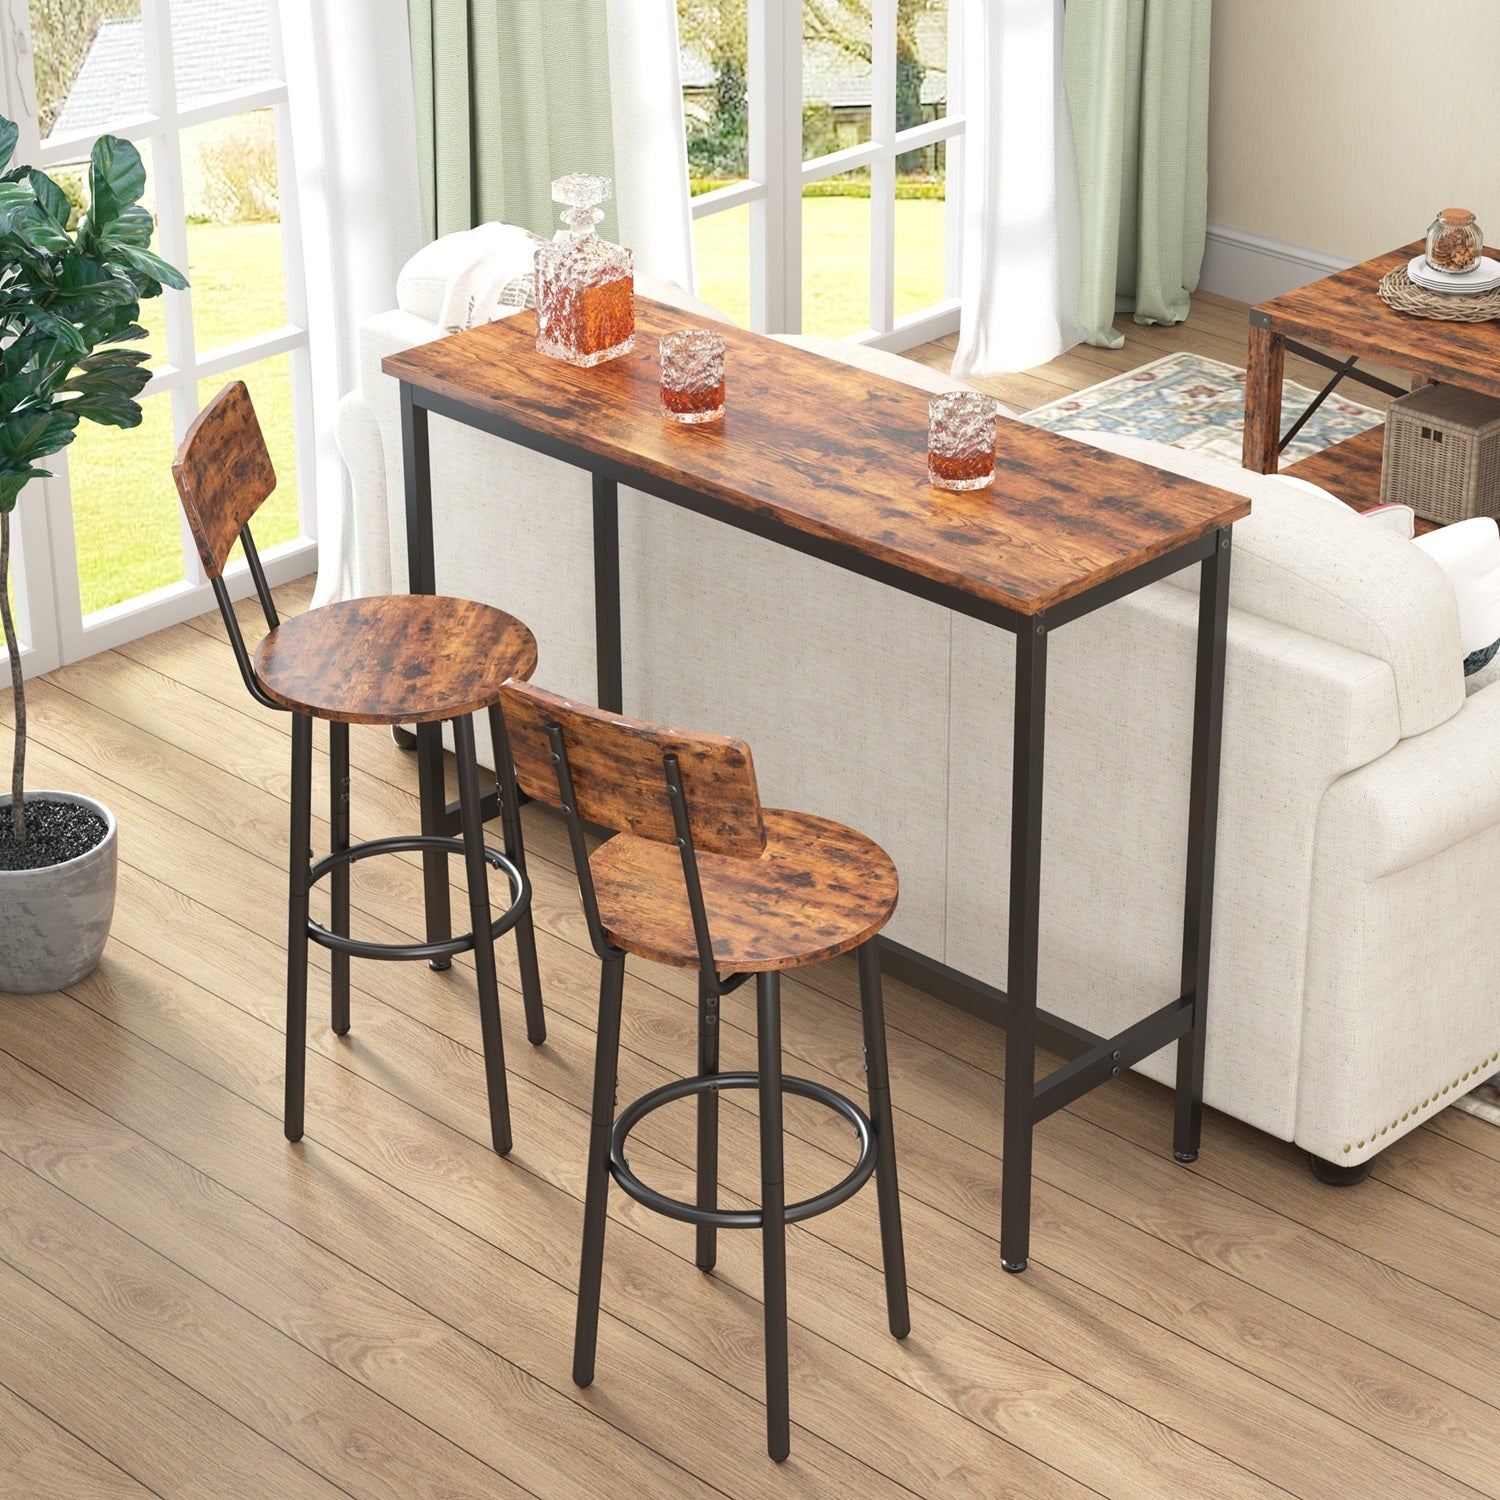 1st Choice Furniture Direct Bar Table Set 1st Choice Rustic Brown Bar Table Set with 2 Bar Stools